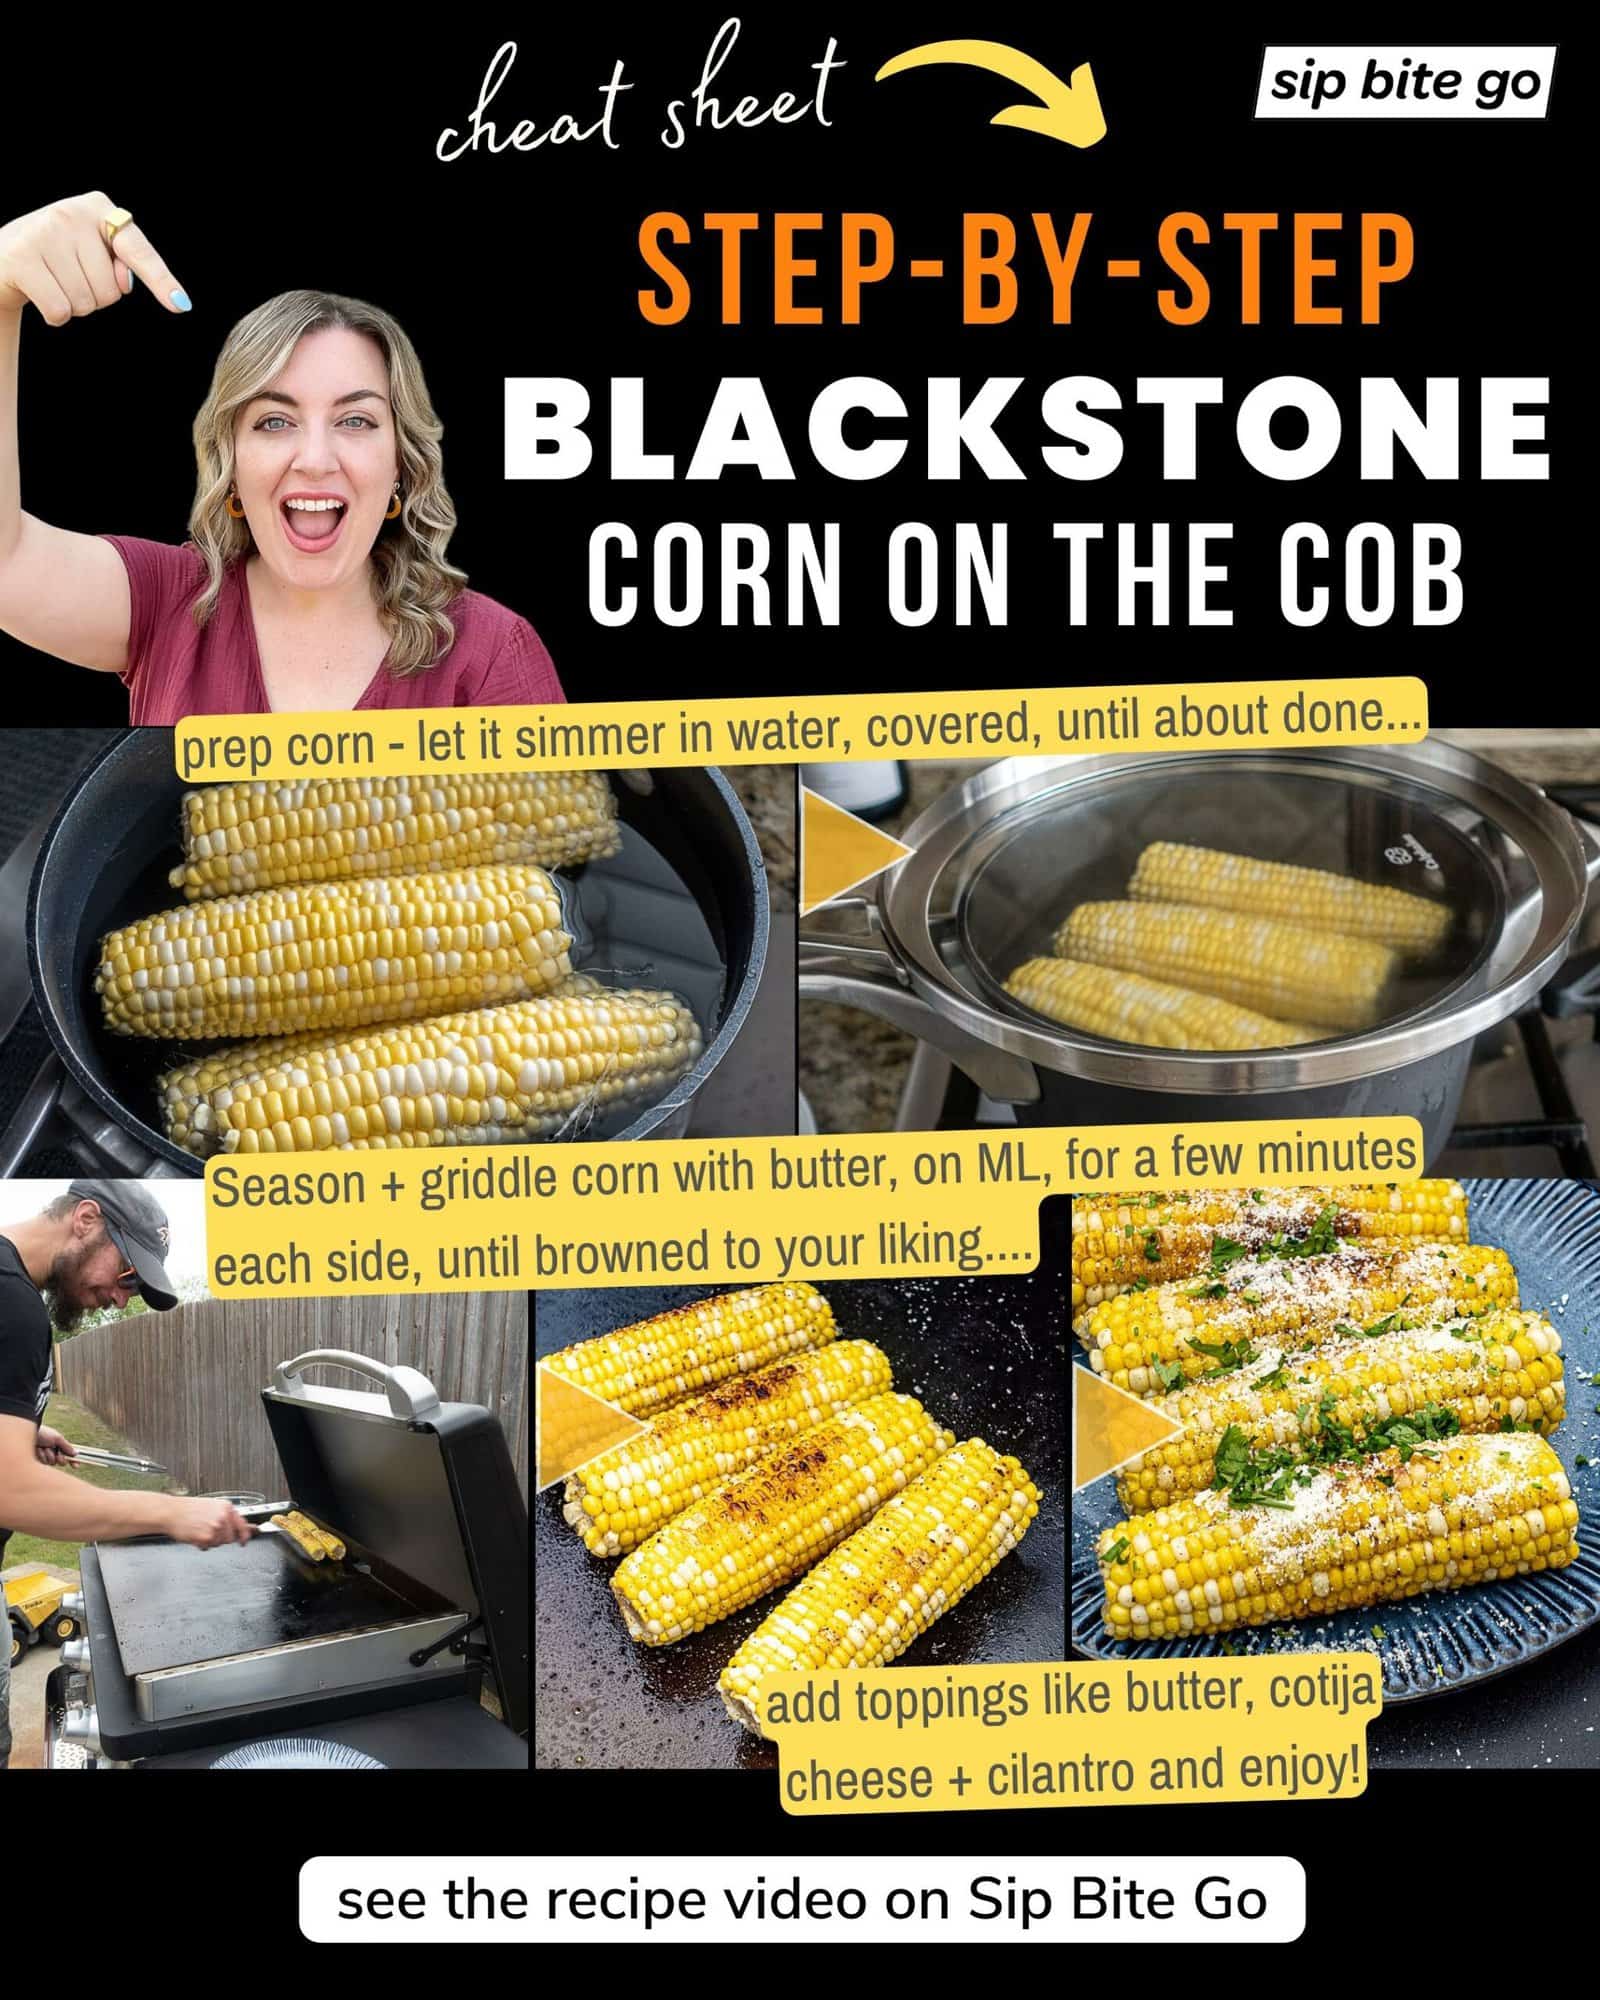 Infographic with step-by-step recipe images and captions for cooking blackstone corn on the cob with Sip Bite Go logo